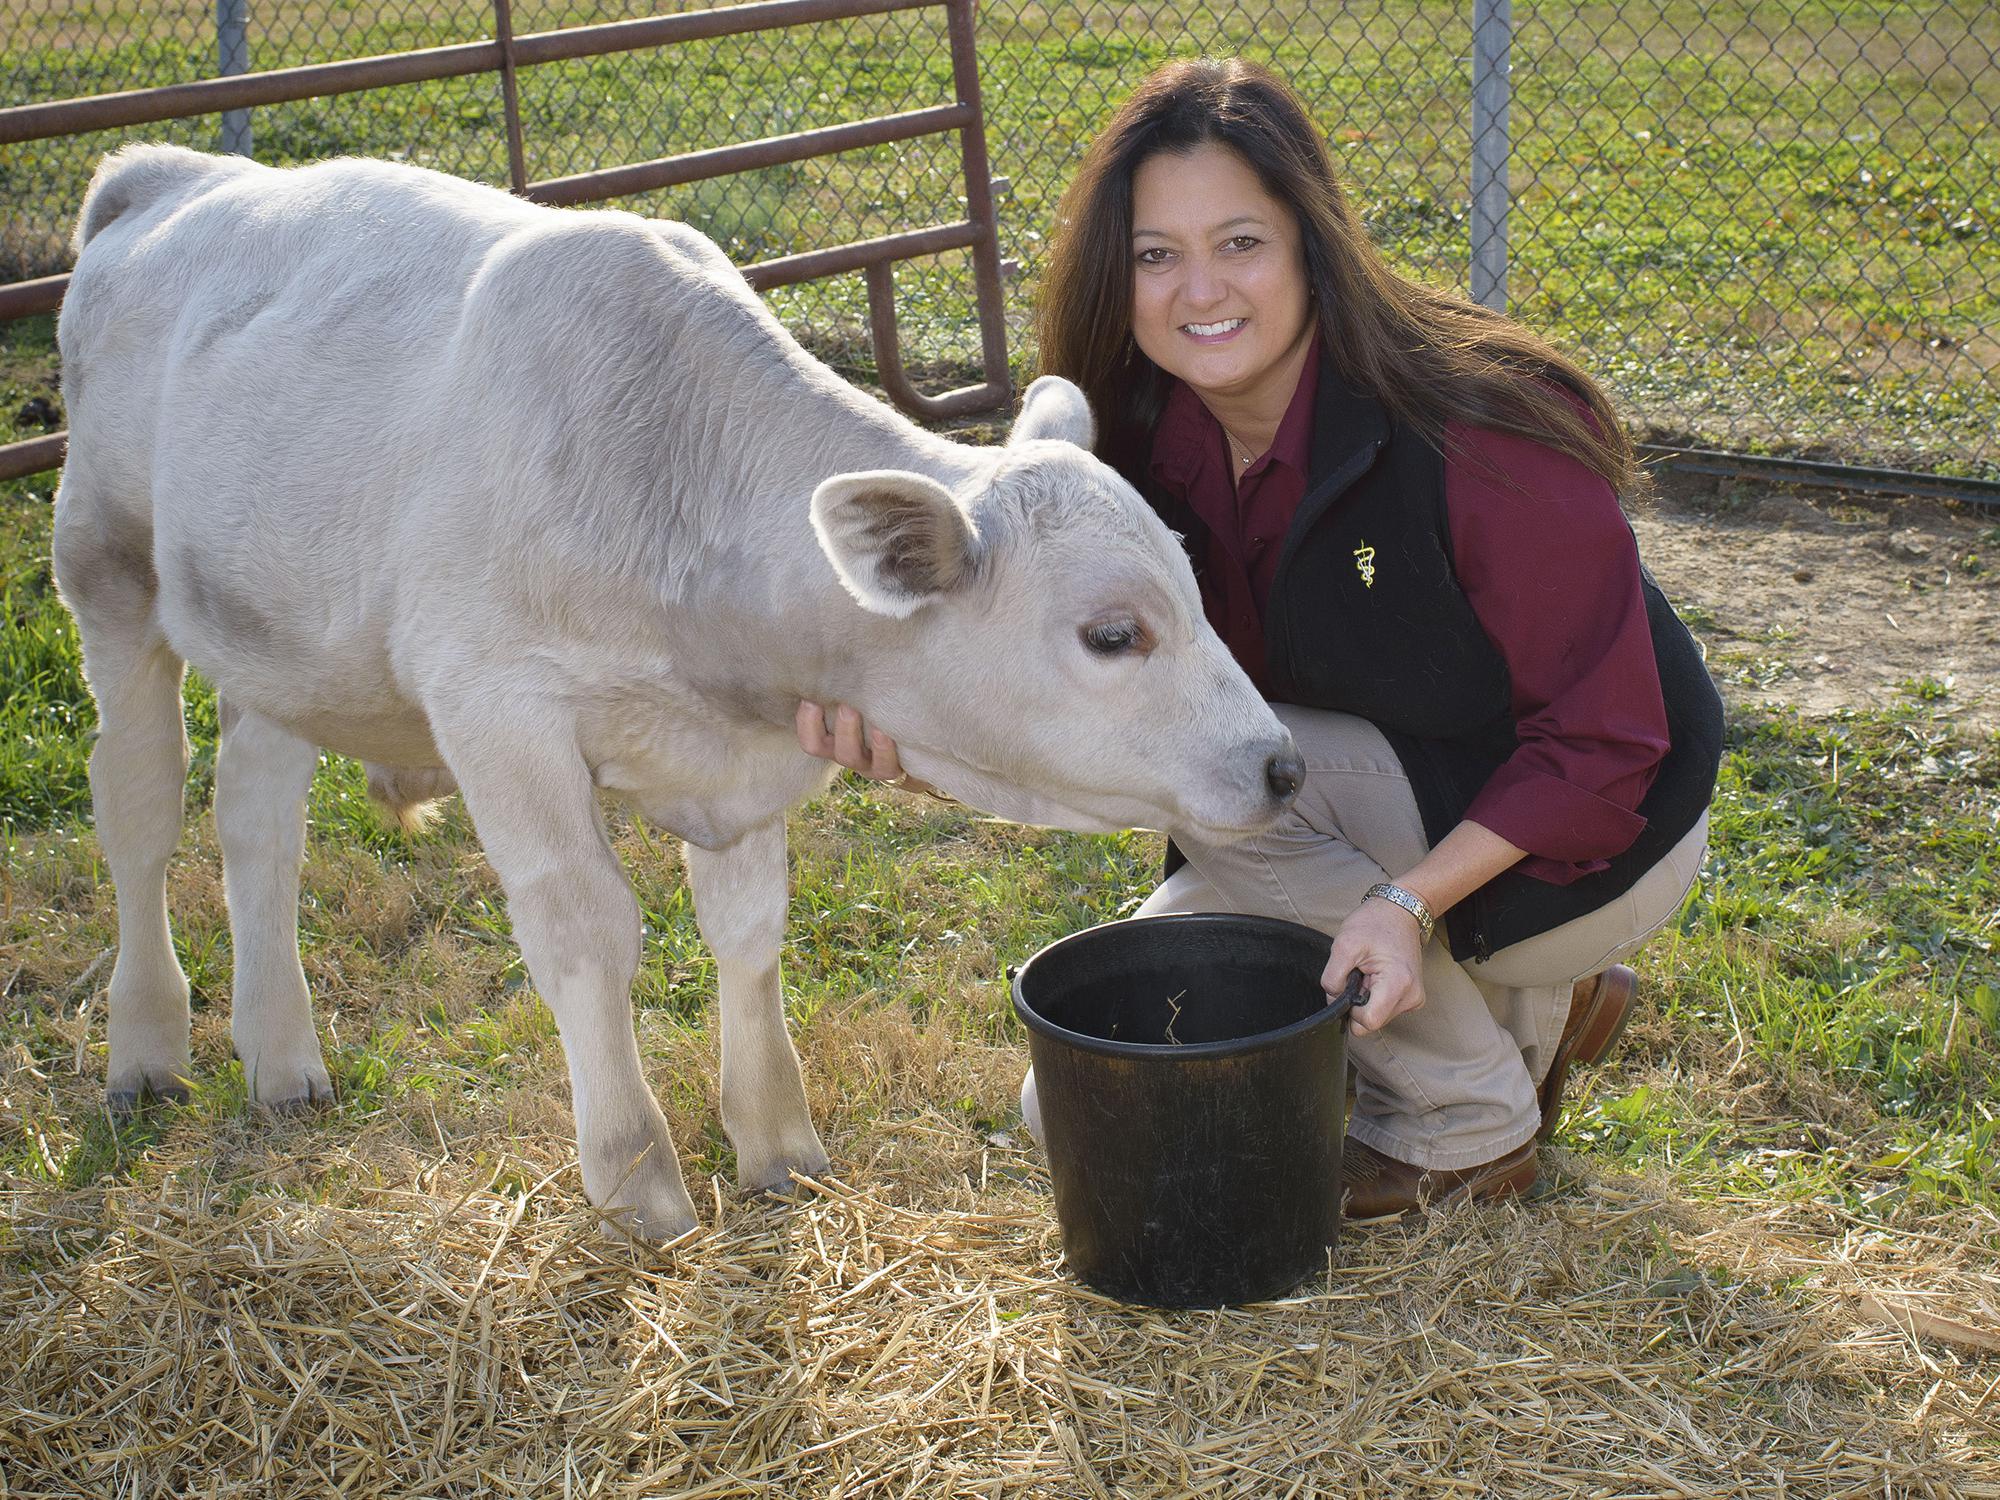 Woman inside a gate in a pasture feeding a white cow.